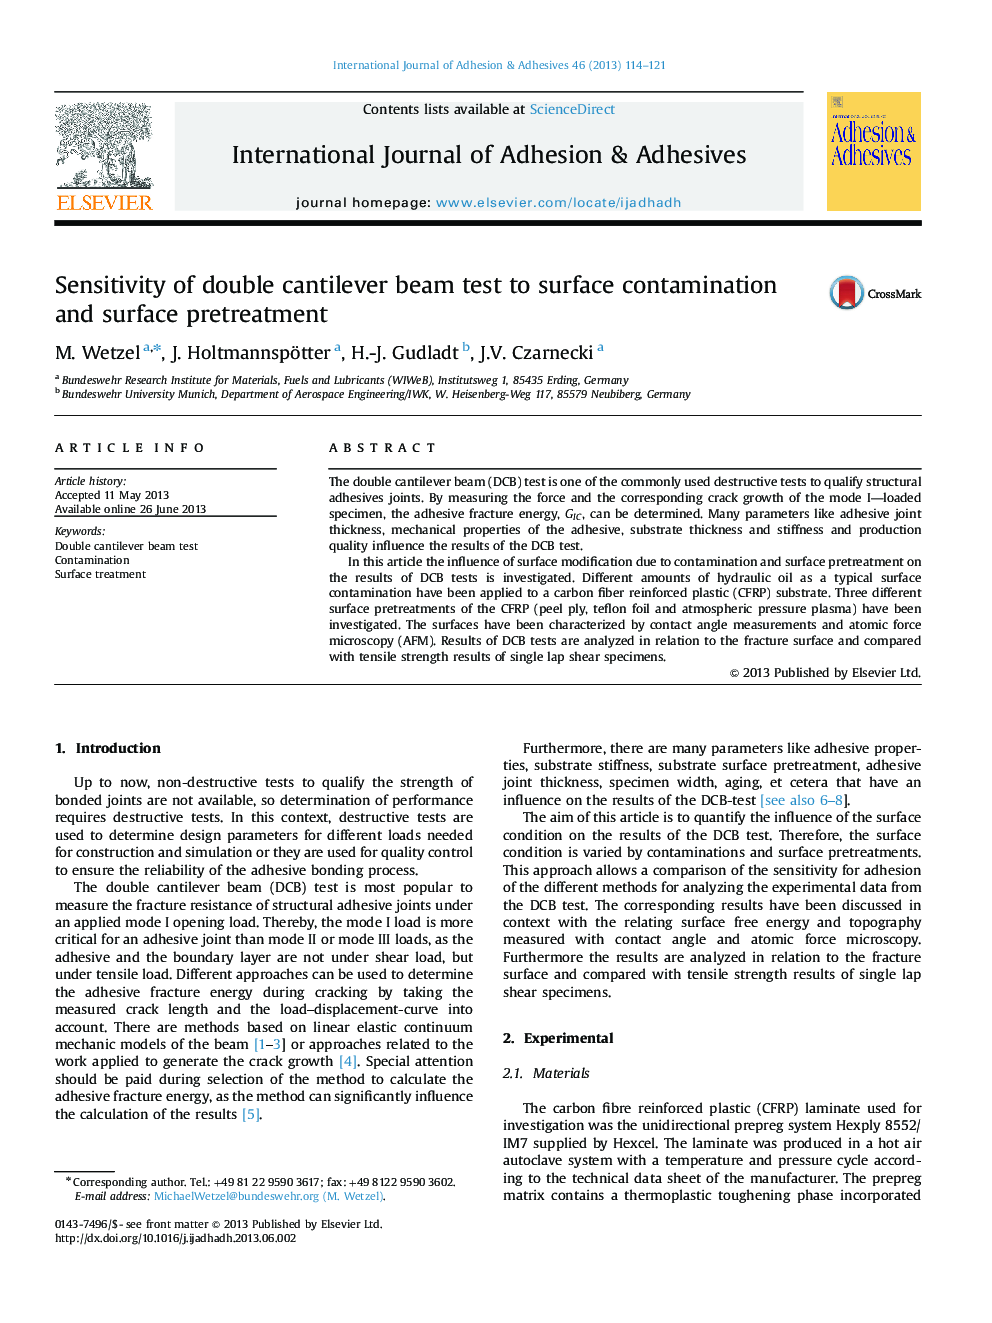 Sensitivity of double cantilever beam test to surface contamination and surface pretreatment